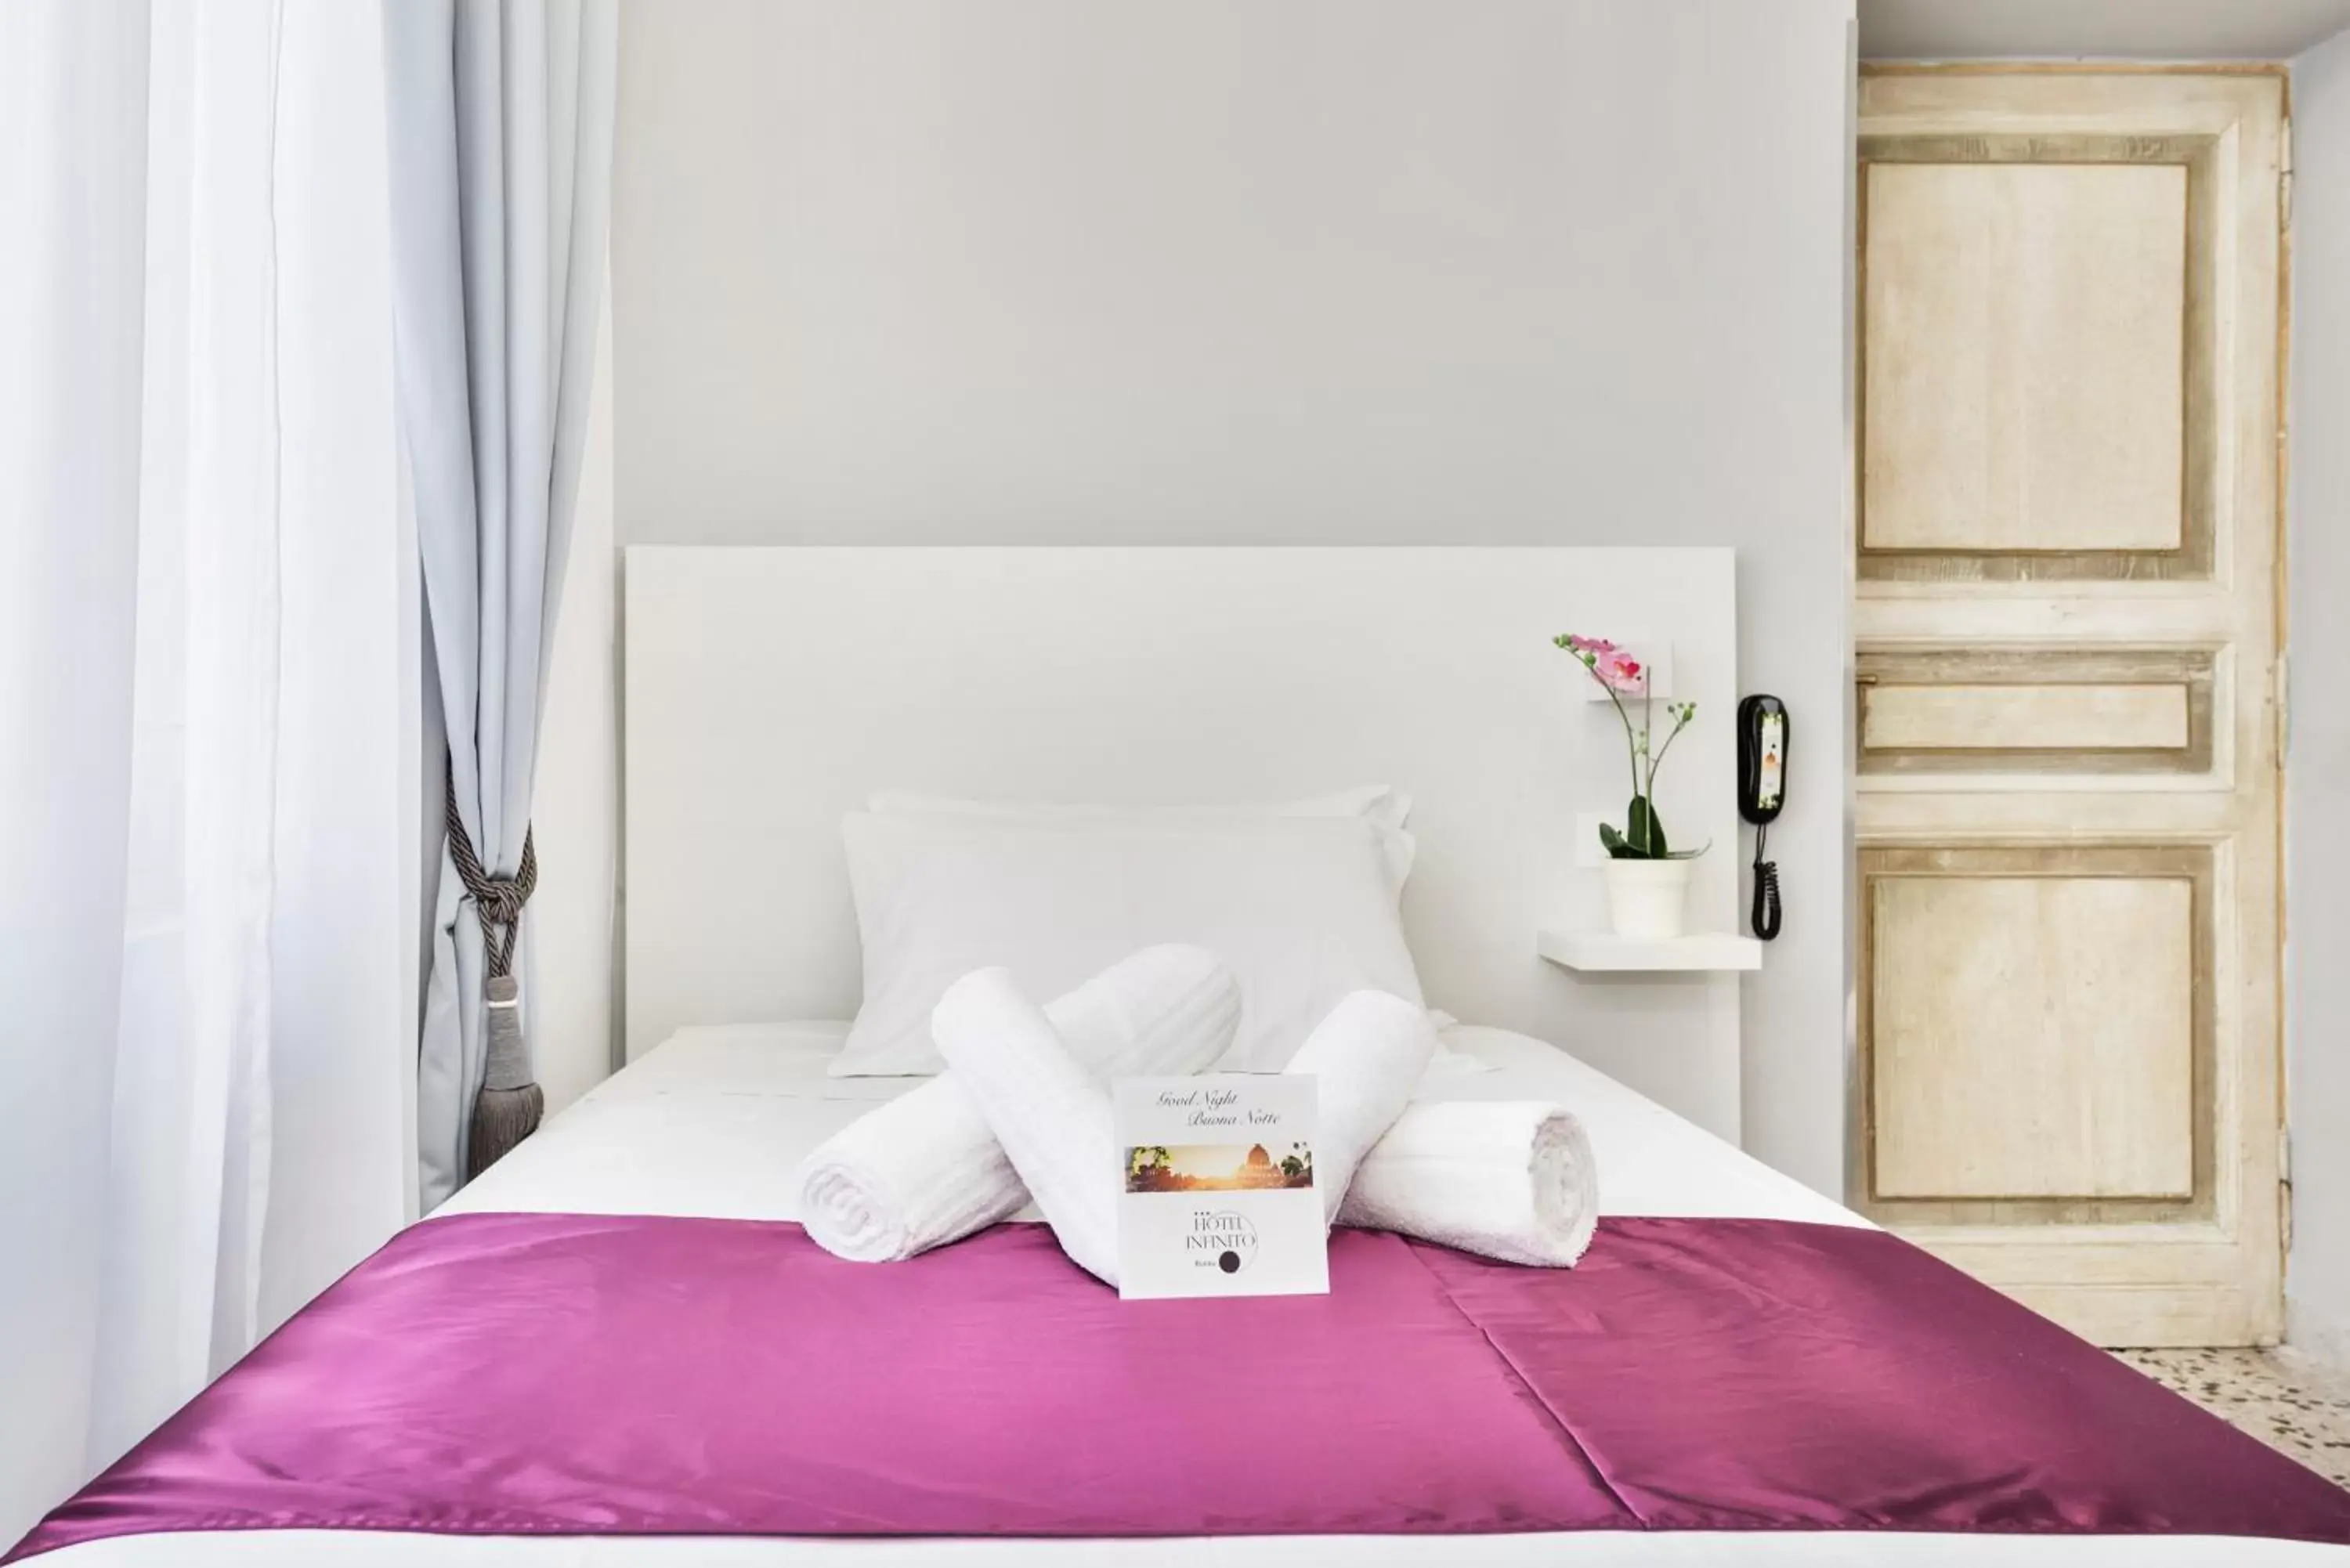 Bed in Hotel Infinito - Gruppo BLAM HOTELS